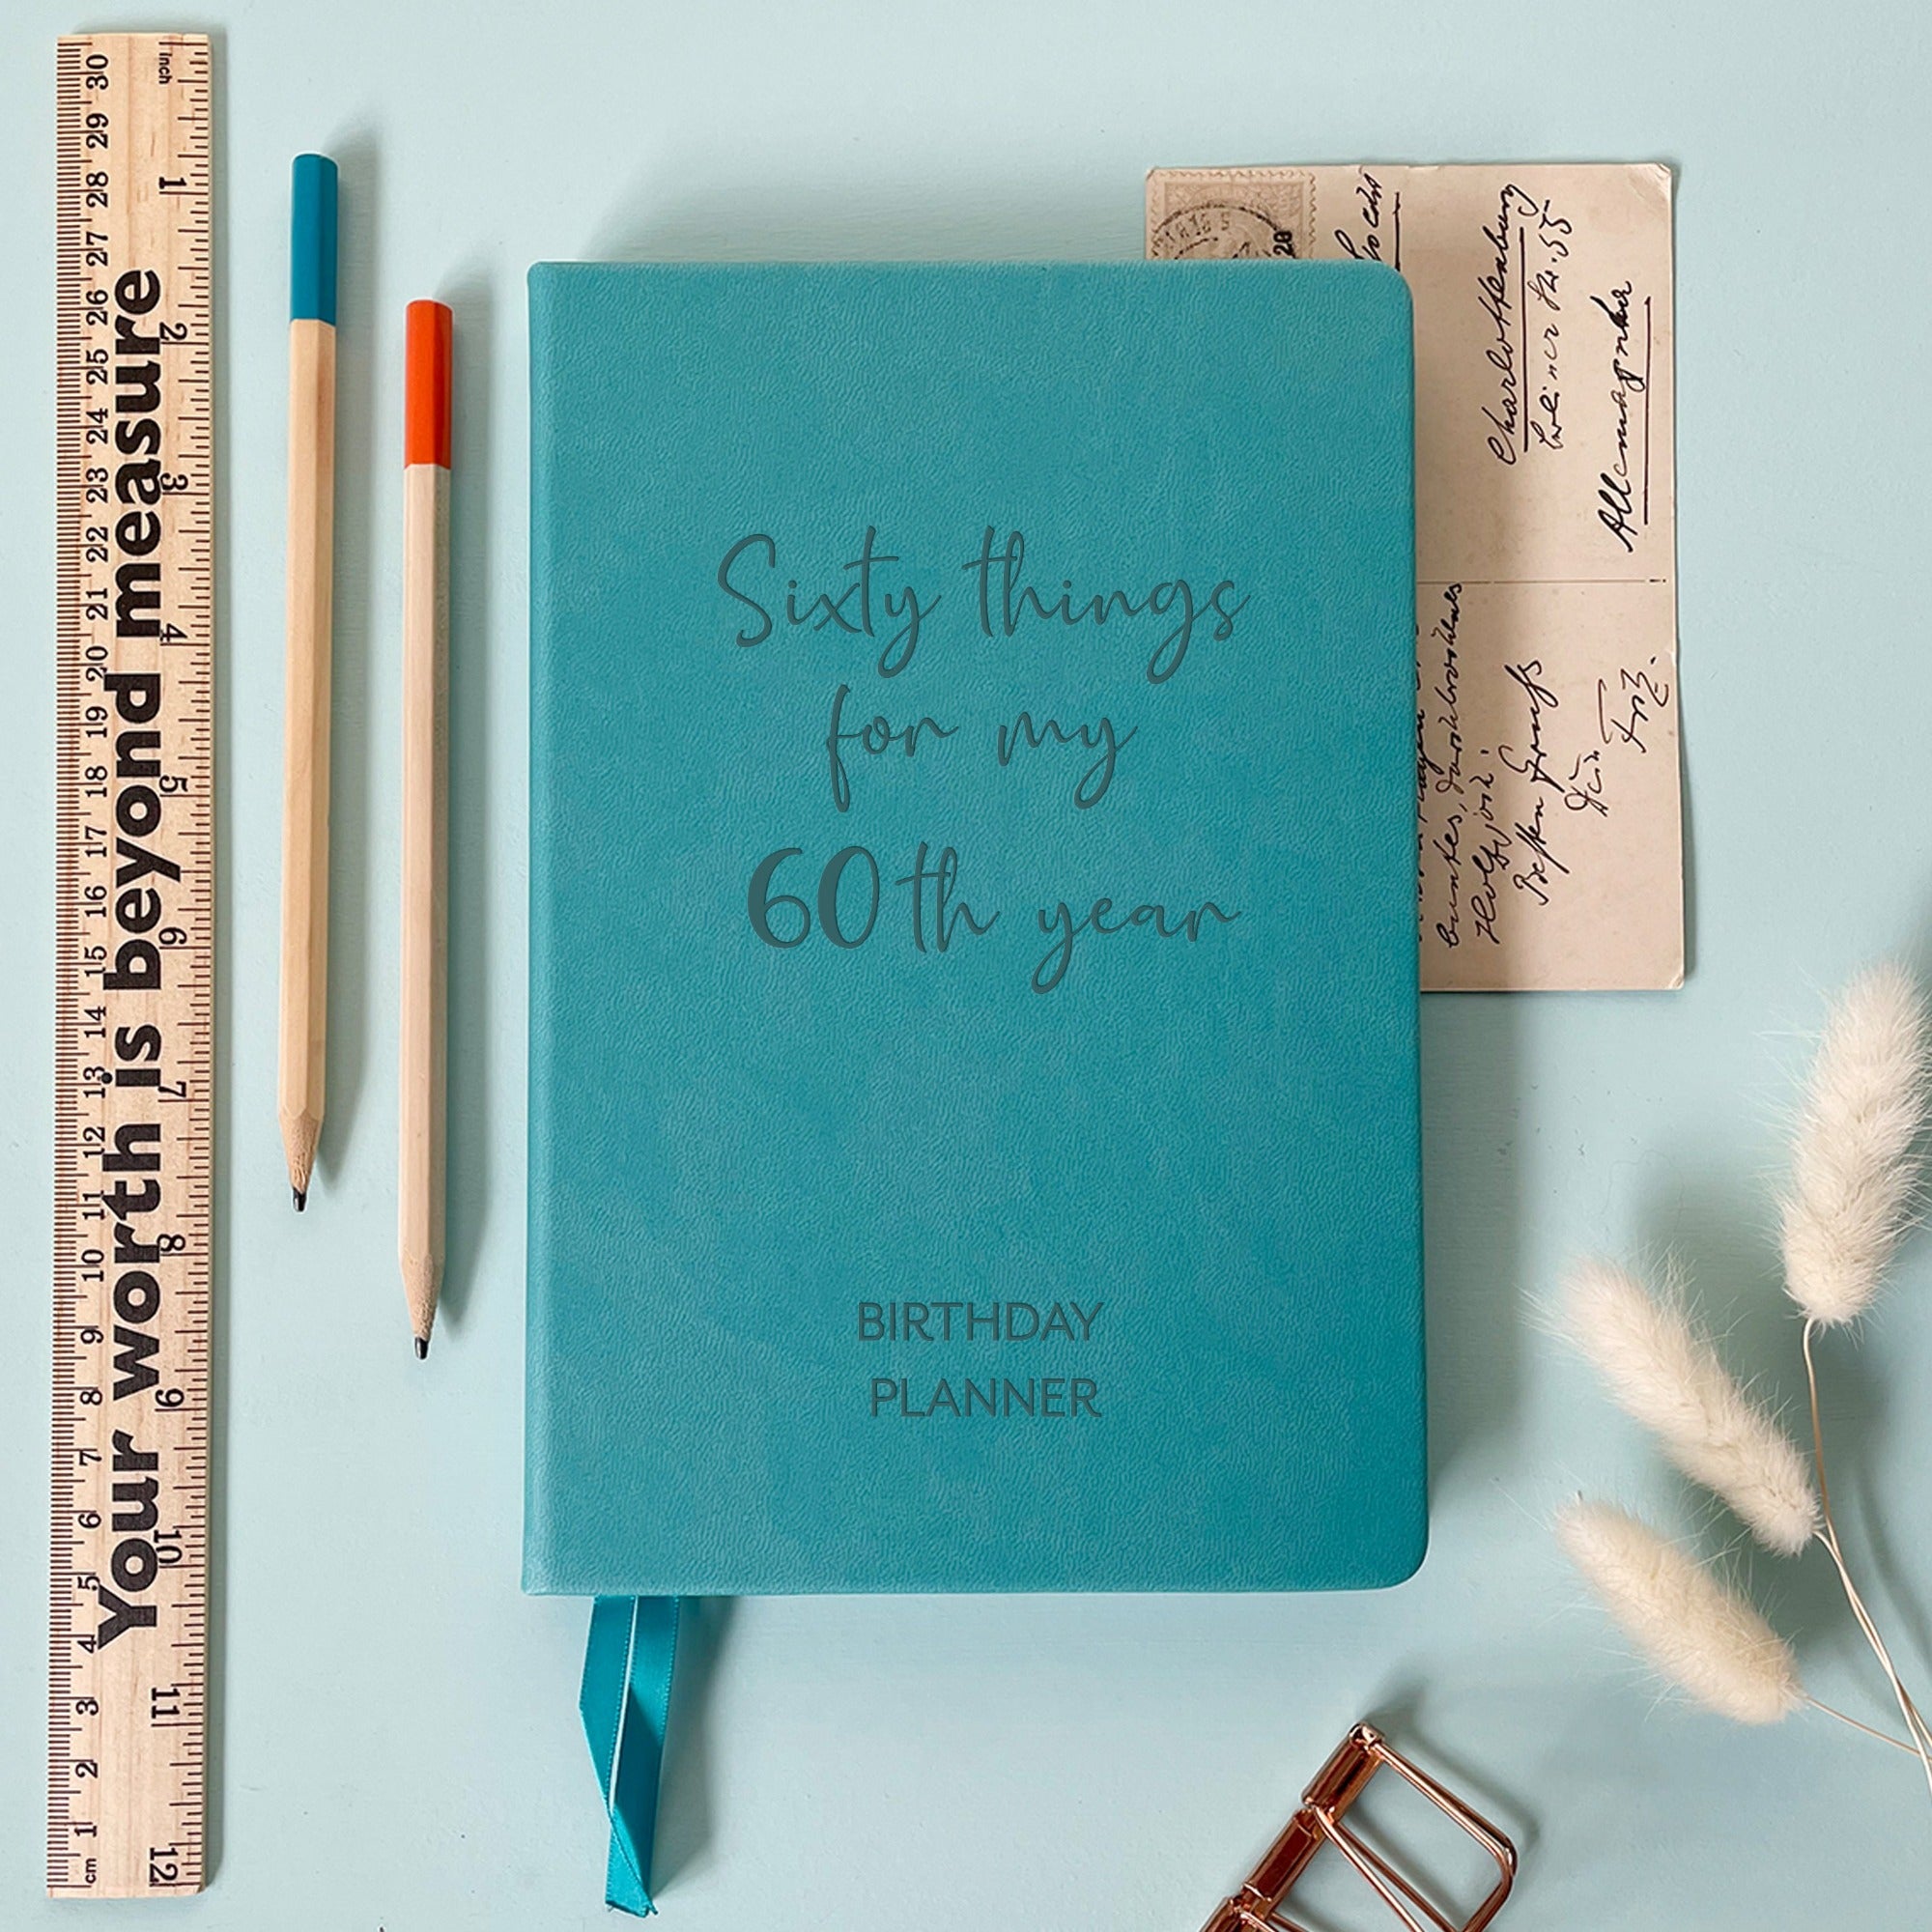 Turquoise Vegan leather notebook with personalised laser engraving on the cover saying sixty things for my 60th year